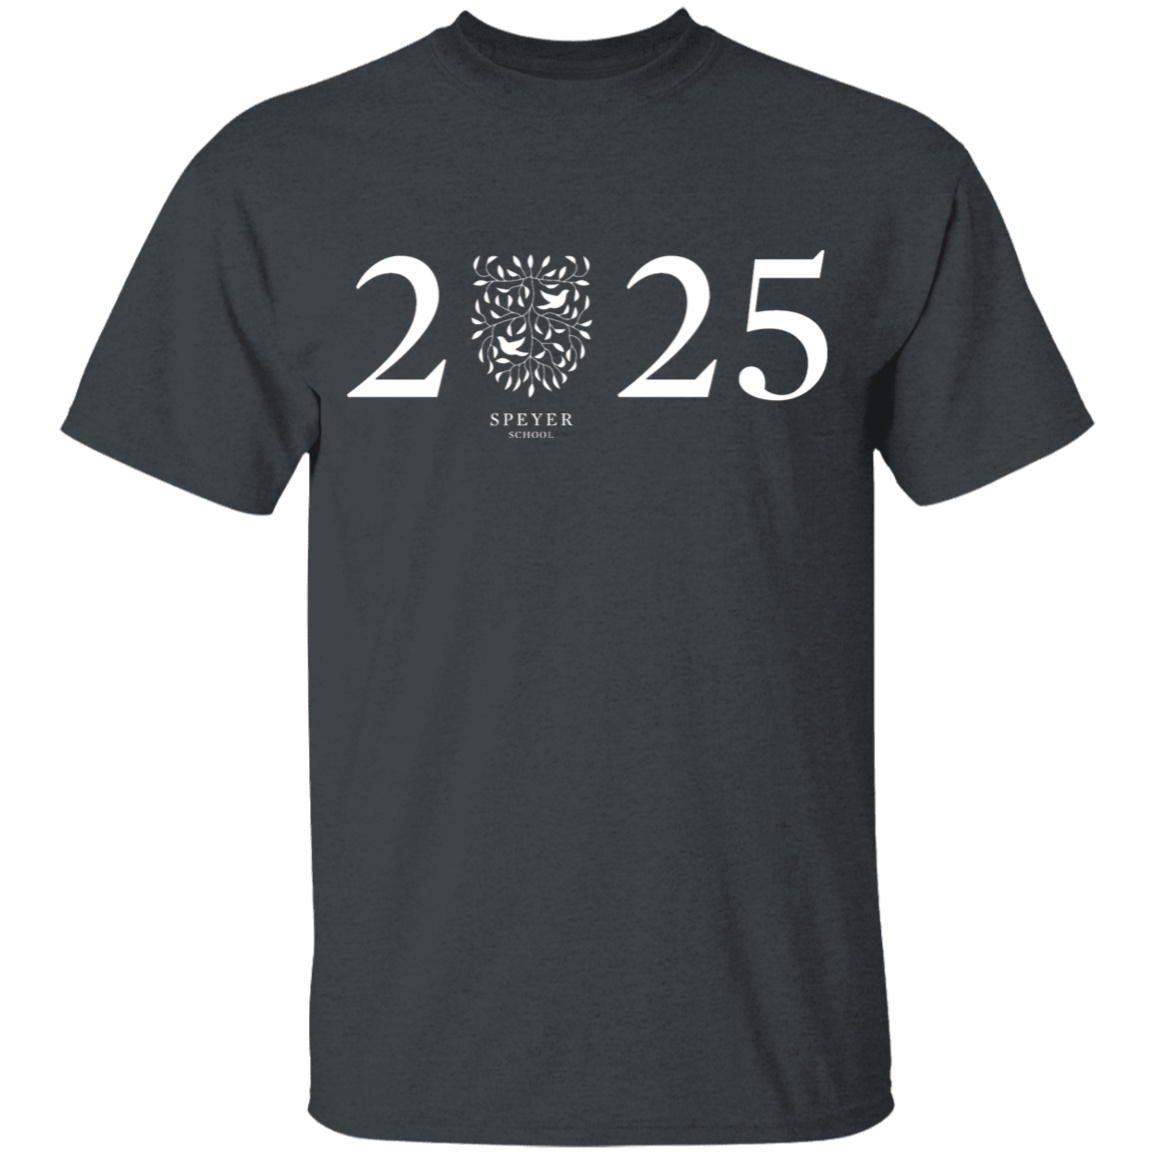 Class of 2025 T-Shirt, Youth Sizes